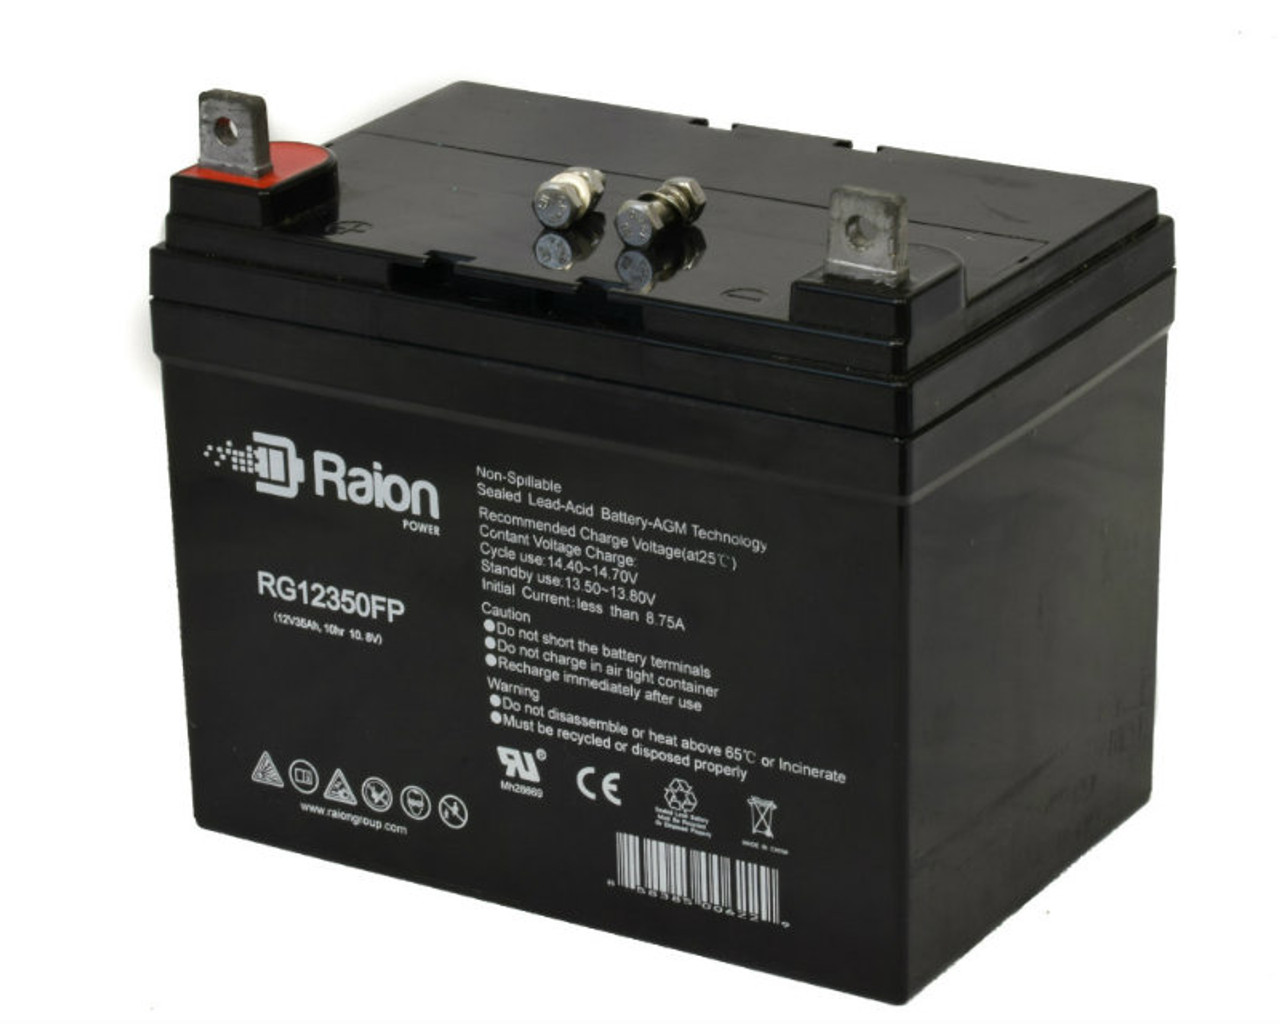 Raion Power Replacement 12V 35Ah RG12350FP Mobility Scooter Battery for Ranger All Seasons Safari